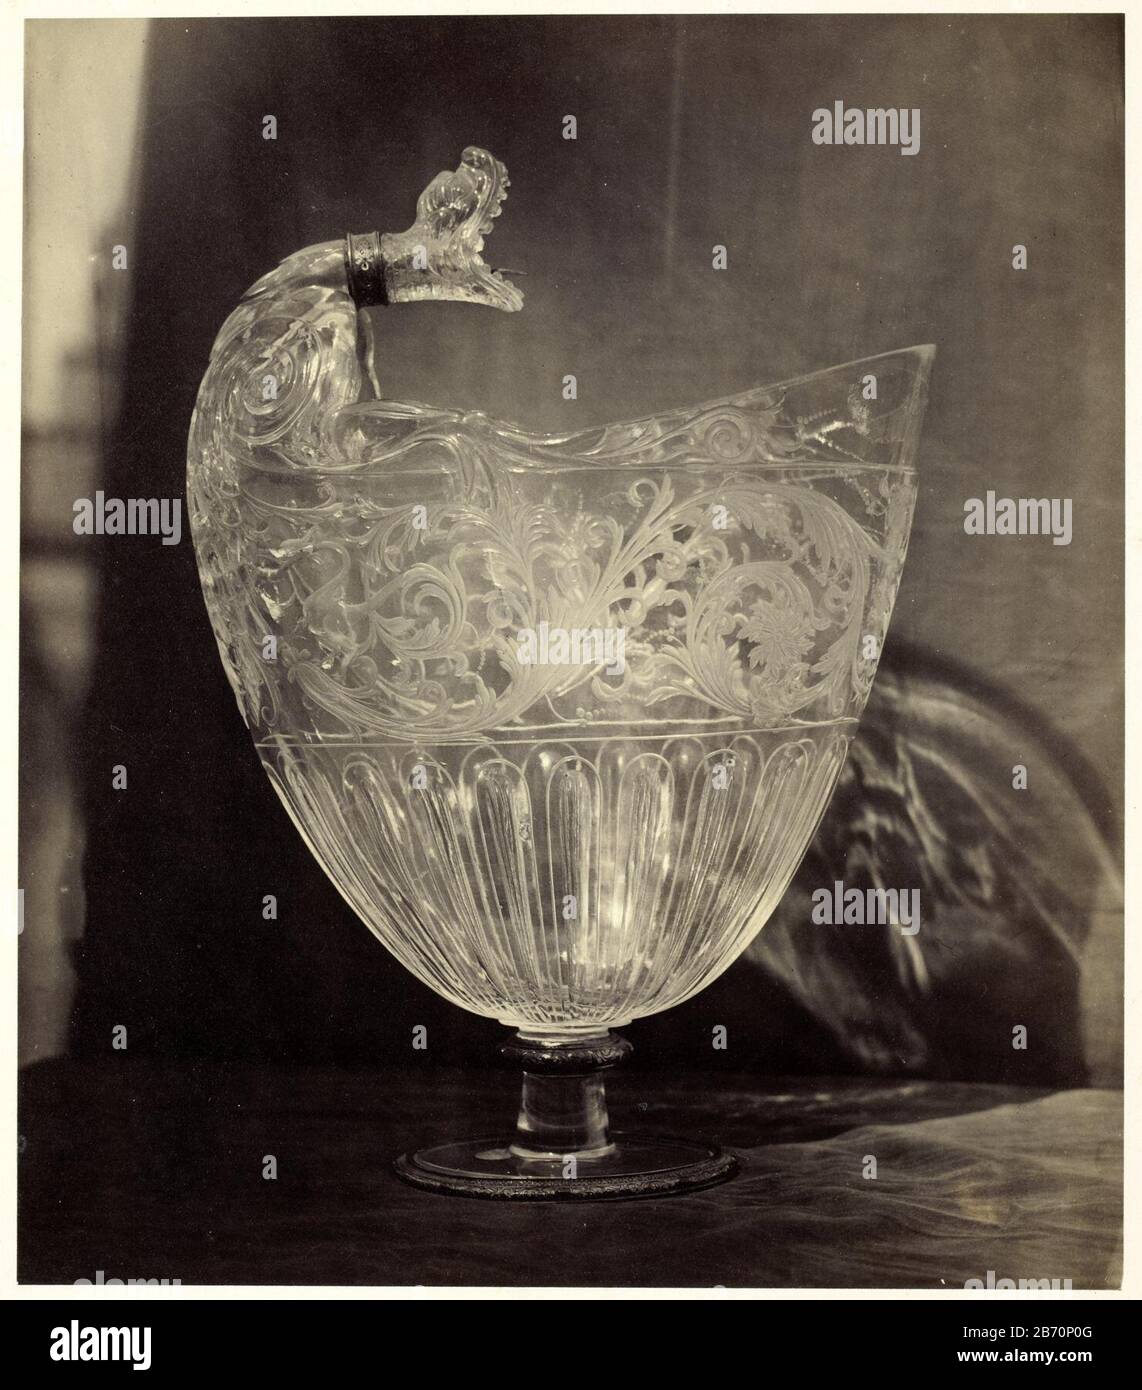 Concessie Mevrouw Complex Kristallen gegraveerde kan met dierenkop, uit het Louvre Crystal engraved  can with animal head, from the Louvre Object Type: photographs Item number:  RP-F-F25504-S Manufacturer : Photographer: Charles Thurston Thompson Date:  ca. 1866 -